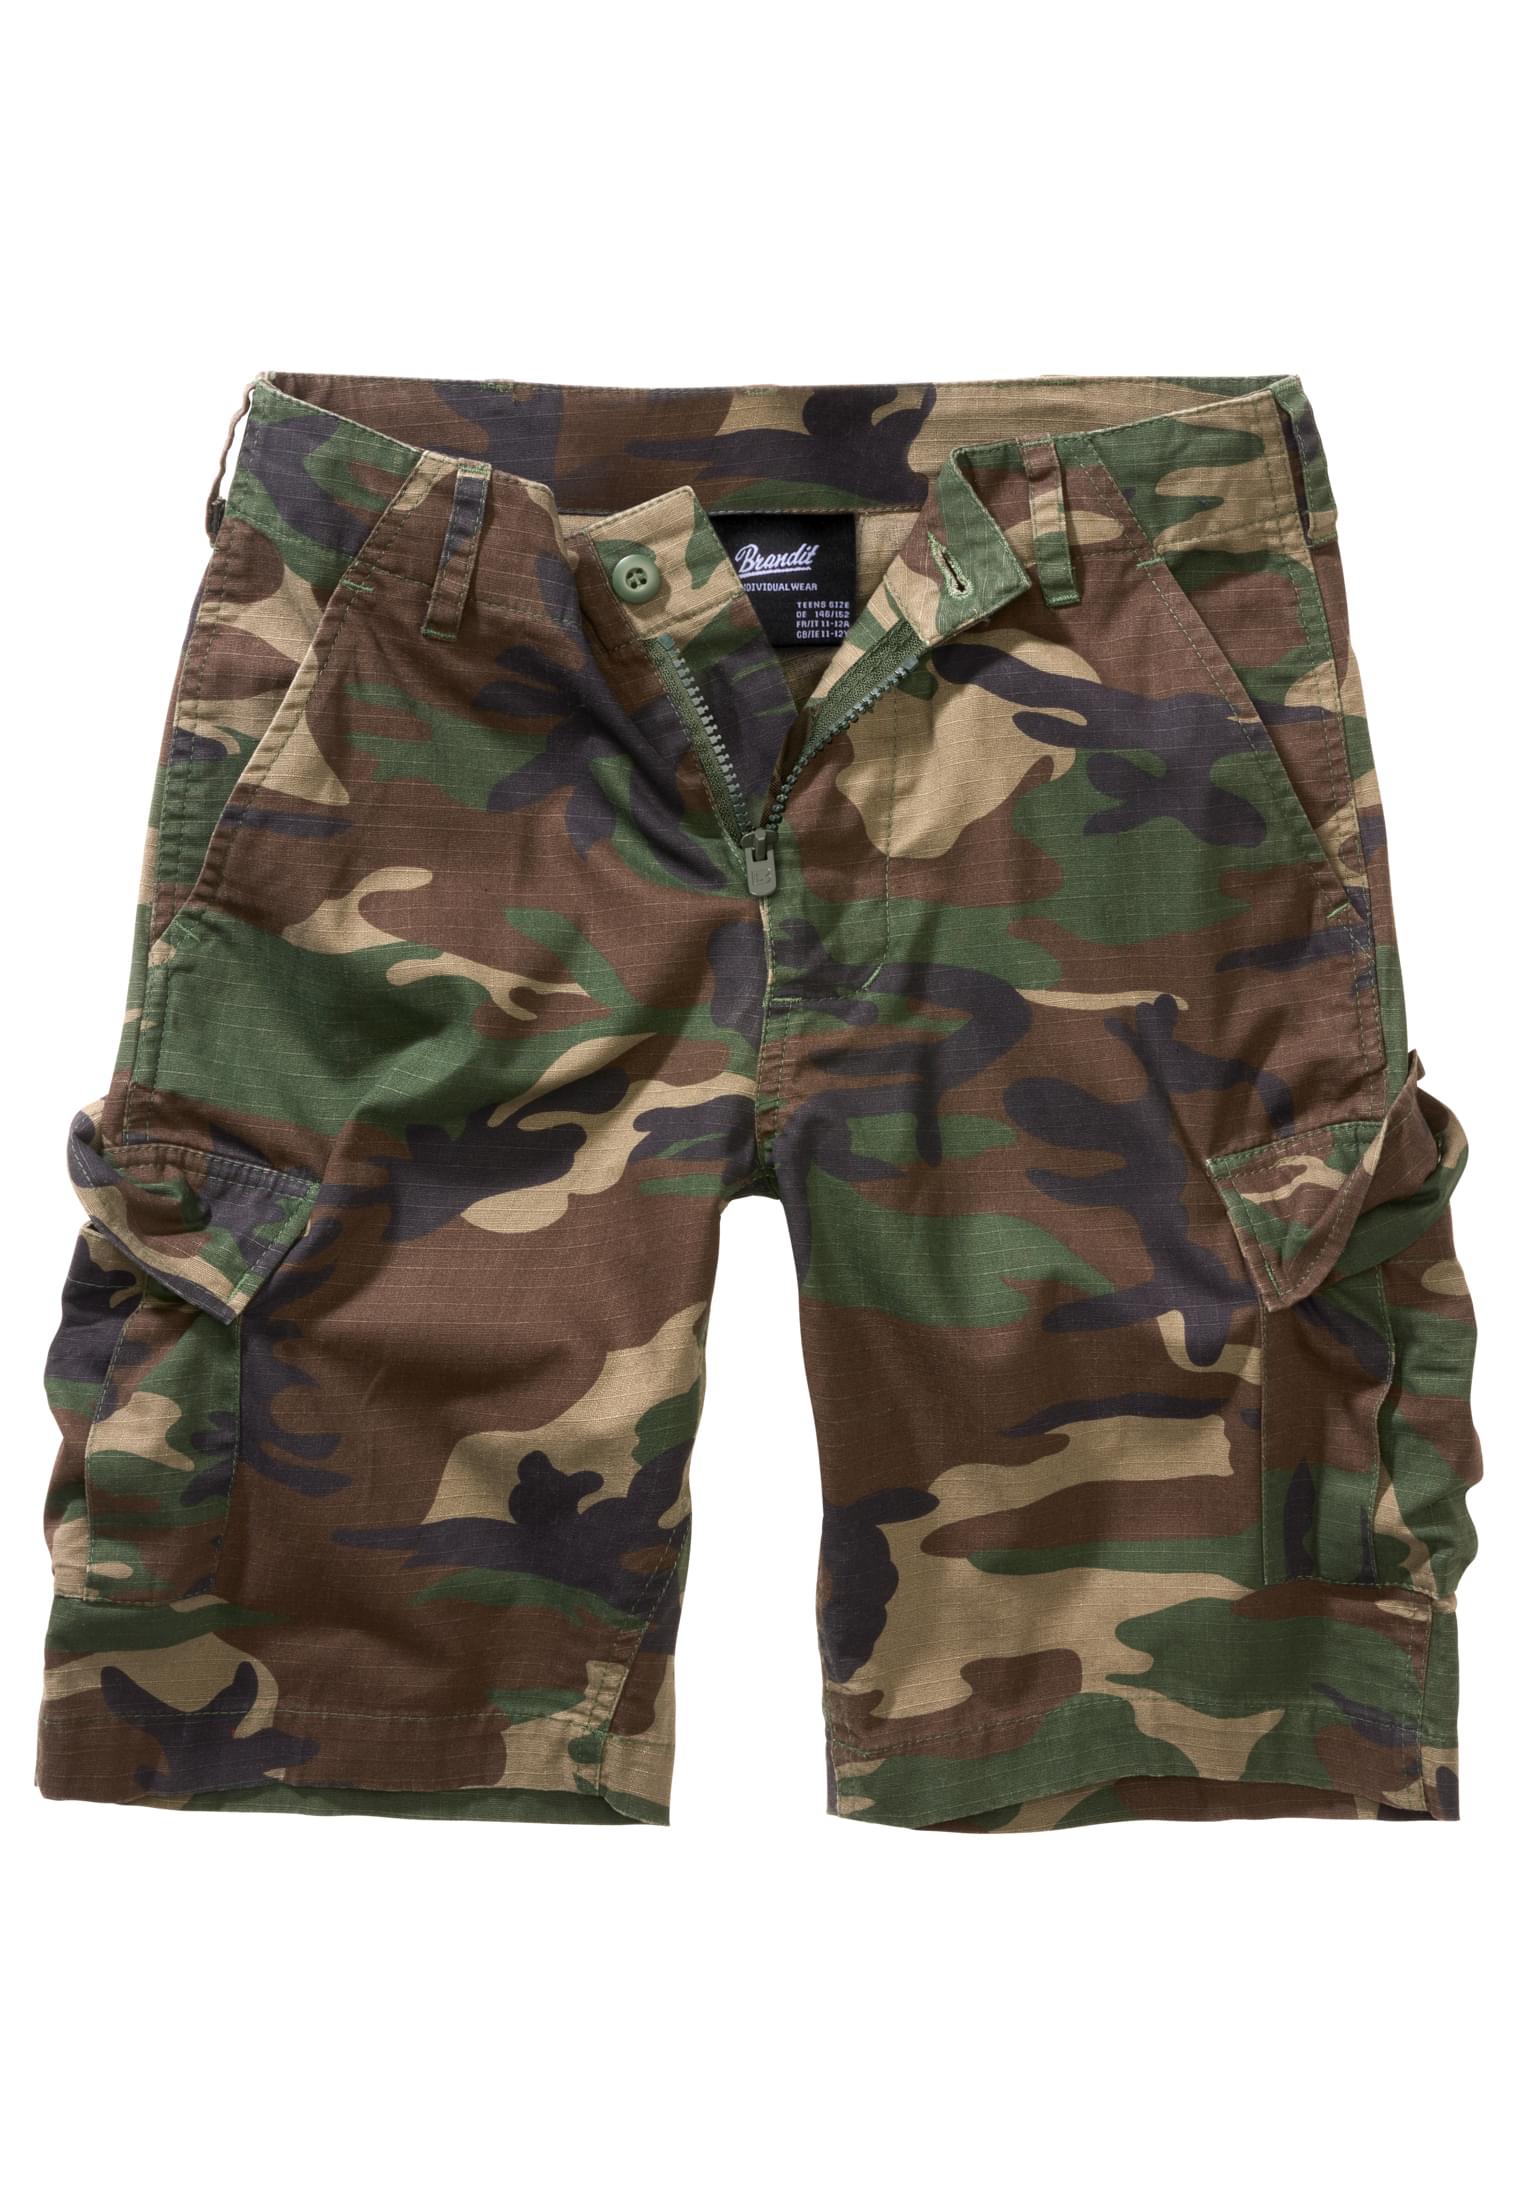 Kinder Kids BDU Ripstop Shorts in Farbe woodland